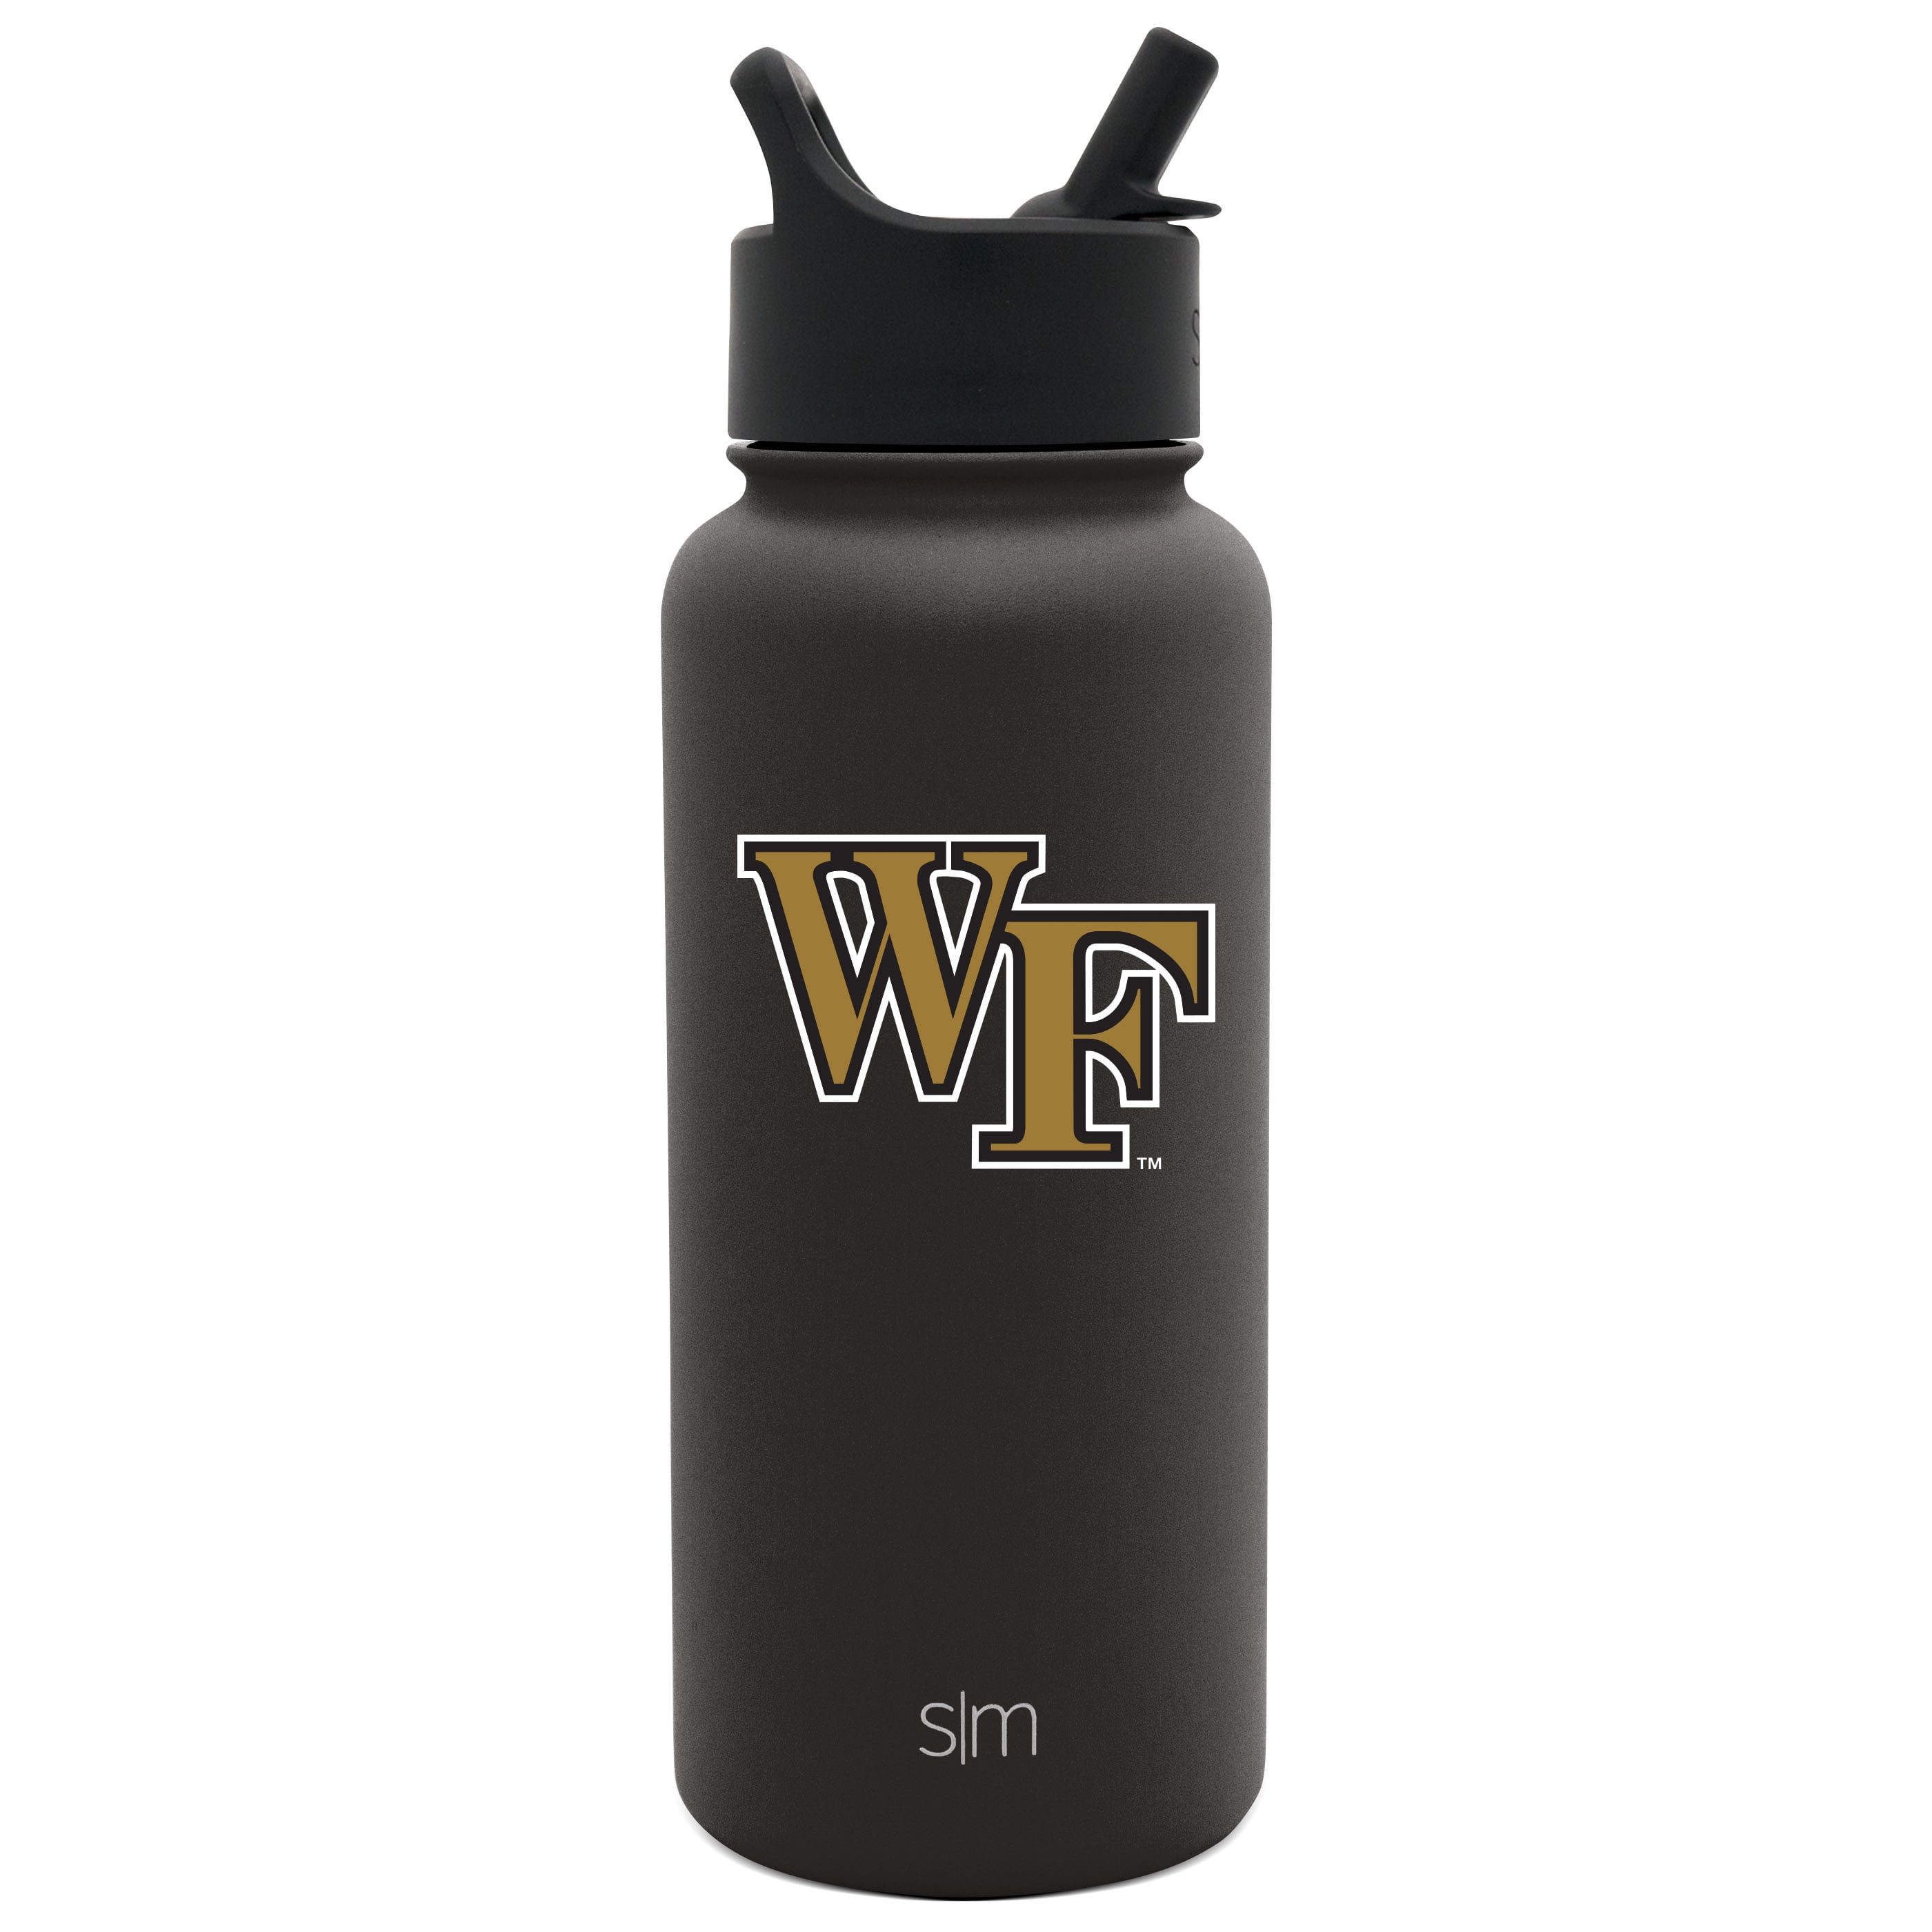 NCAA Wake Forest Vacuum Insulated Water Flask Travel Coffee Tumbler 18/8 Stainless Steel Simple Modern 32oz Summit Water Bottle with Straw Lid 